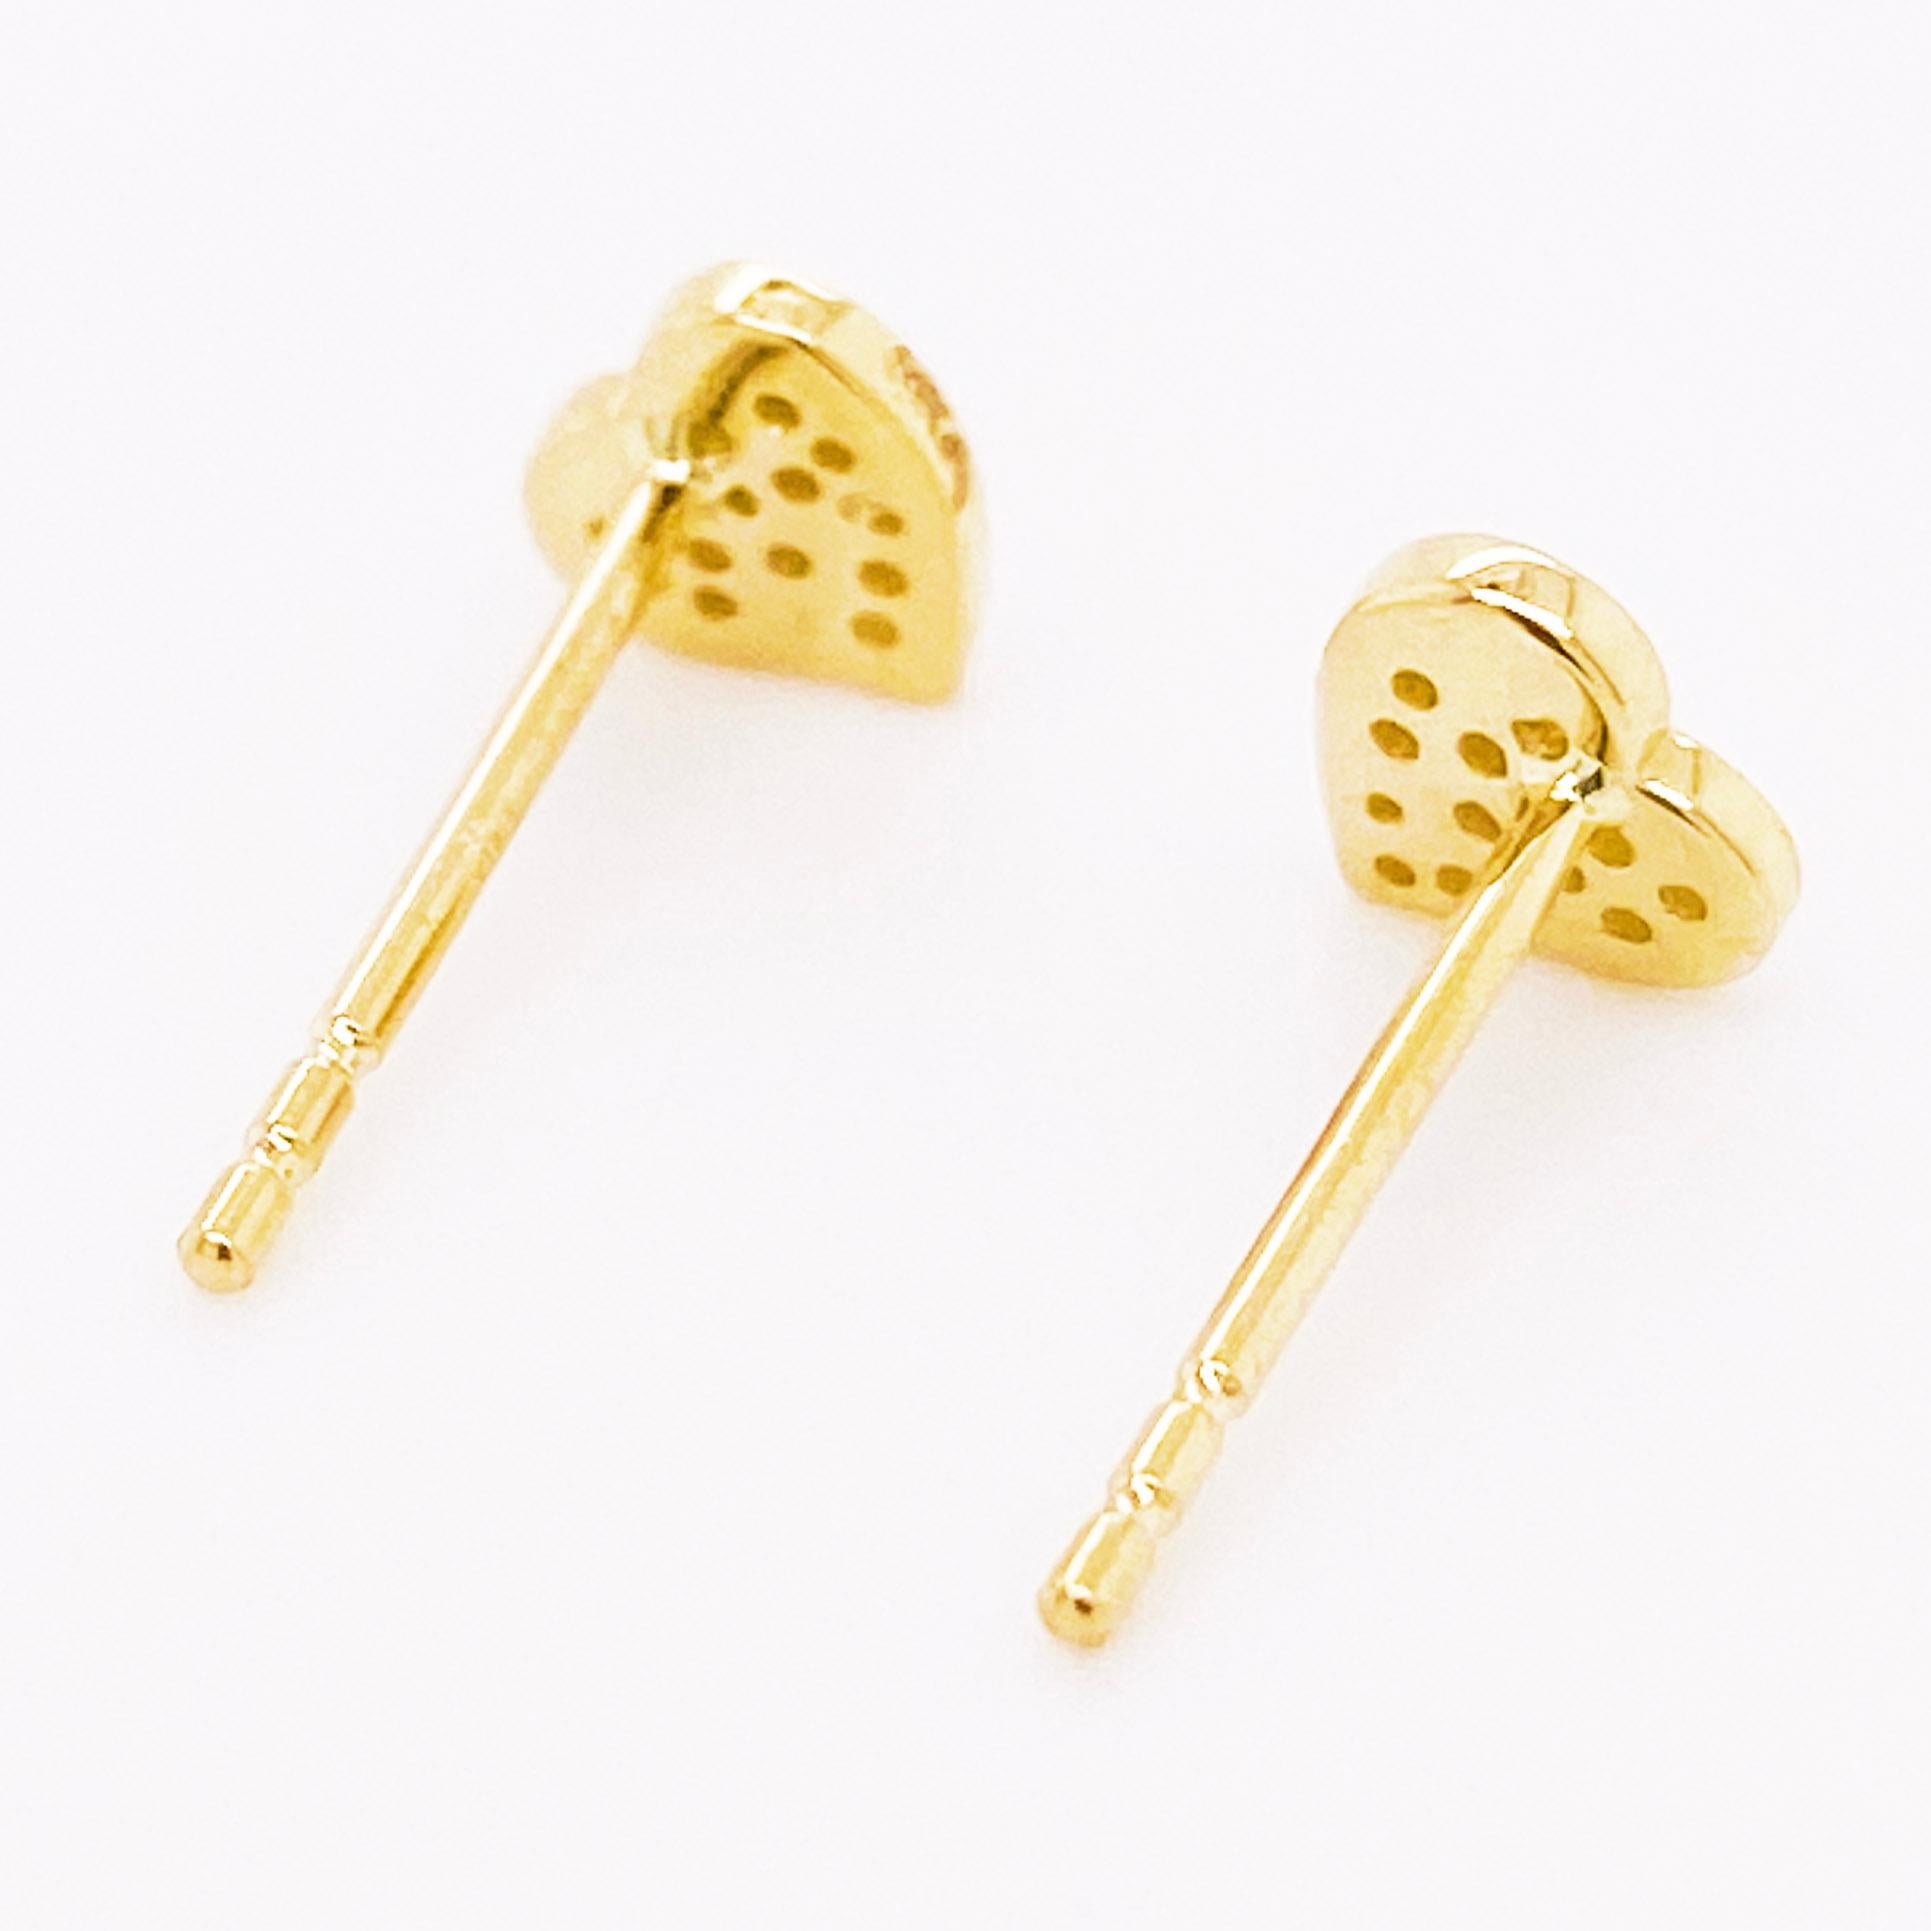 Tiny Heart Pave Diamond Studs, 14 Karat Gold 0.06 Carats Valentine Love In New Condition For Sale In Austin, TX